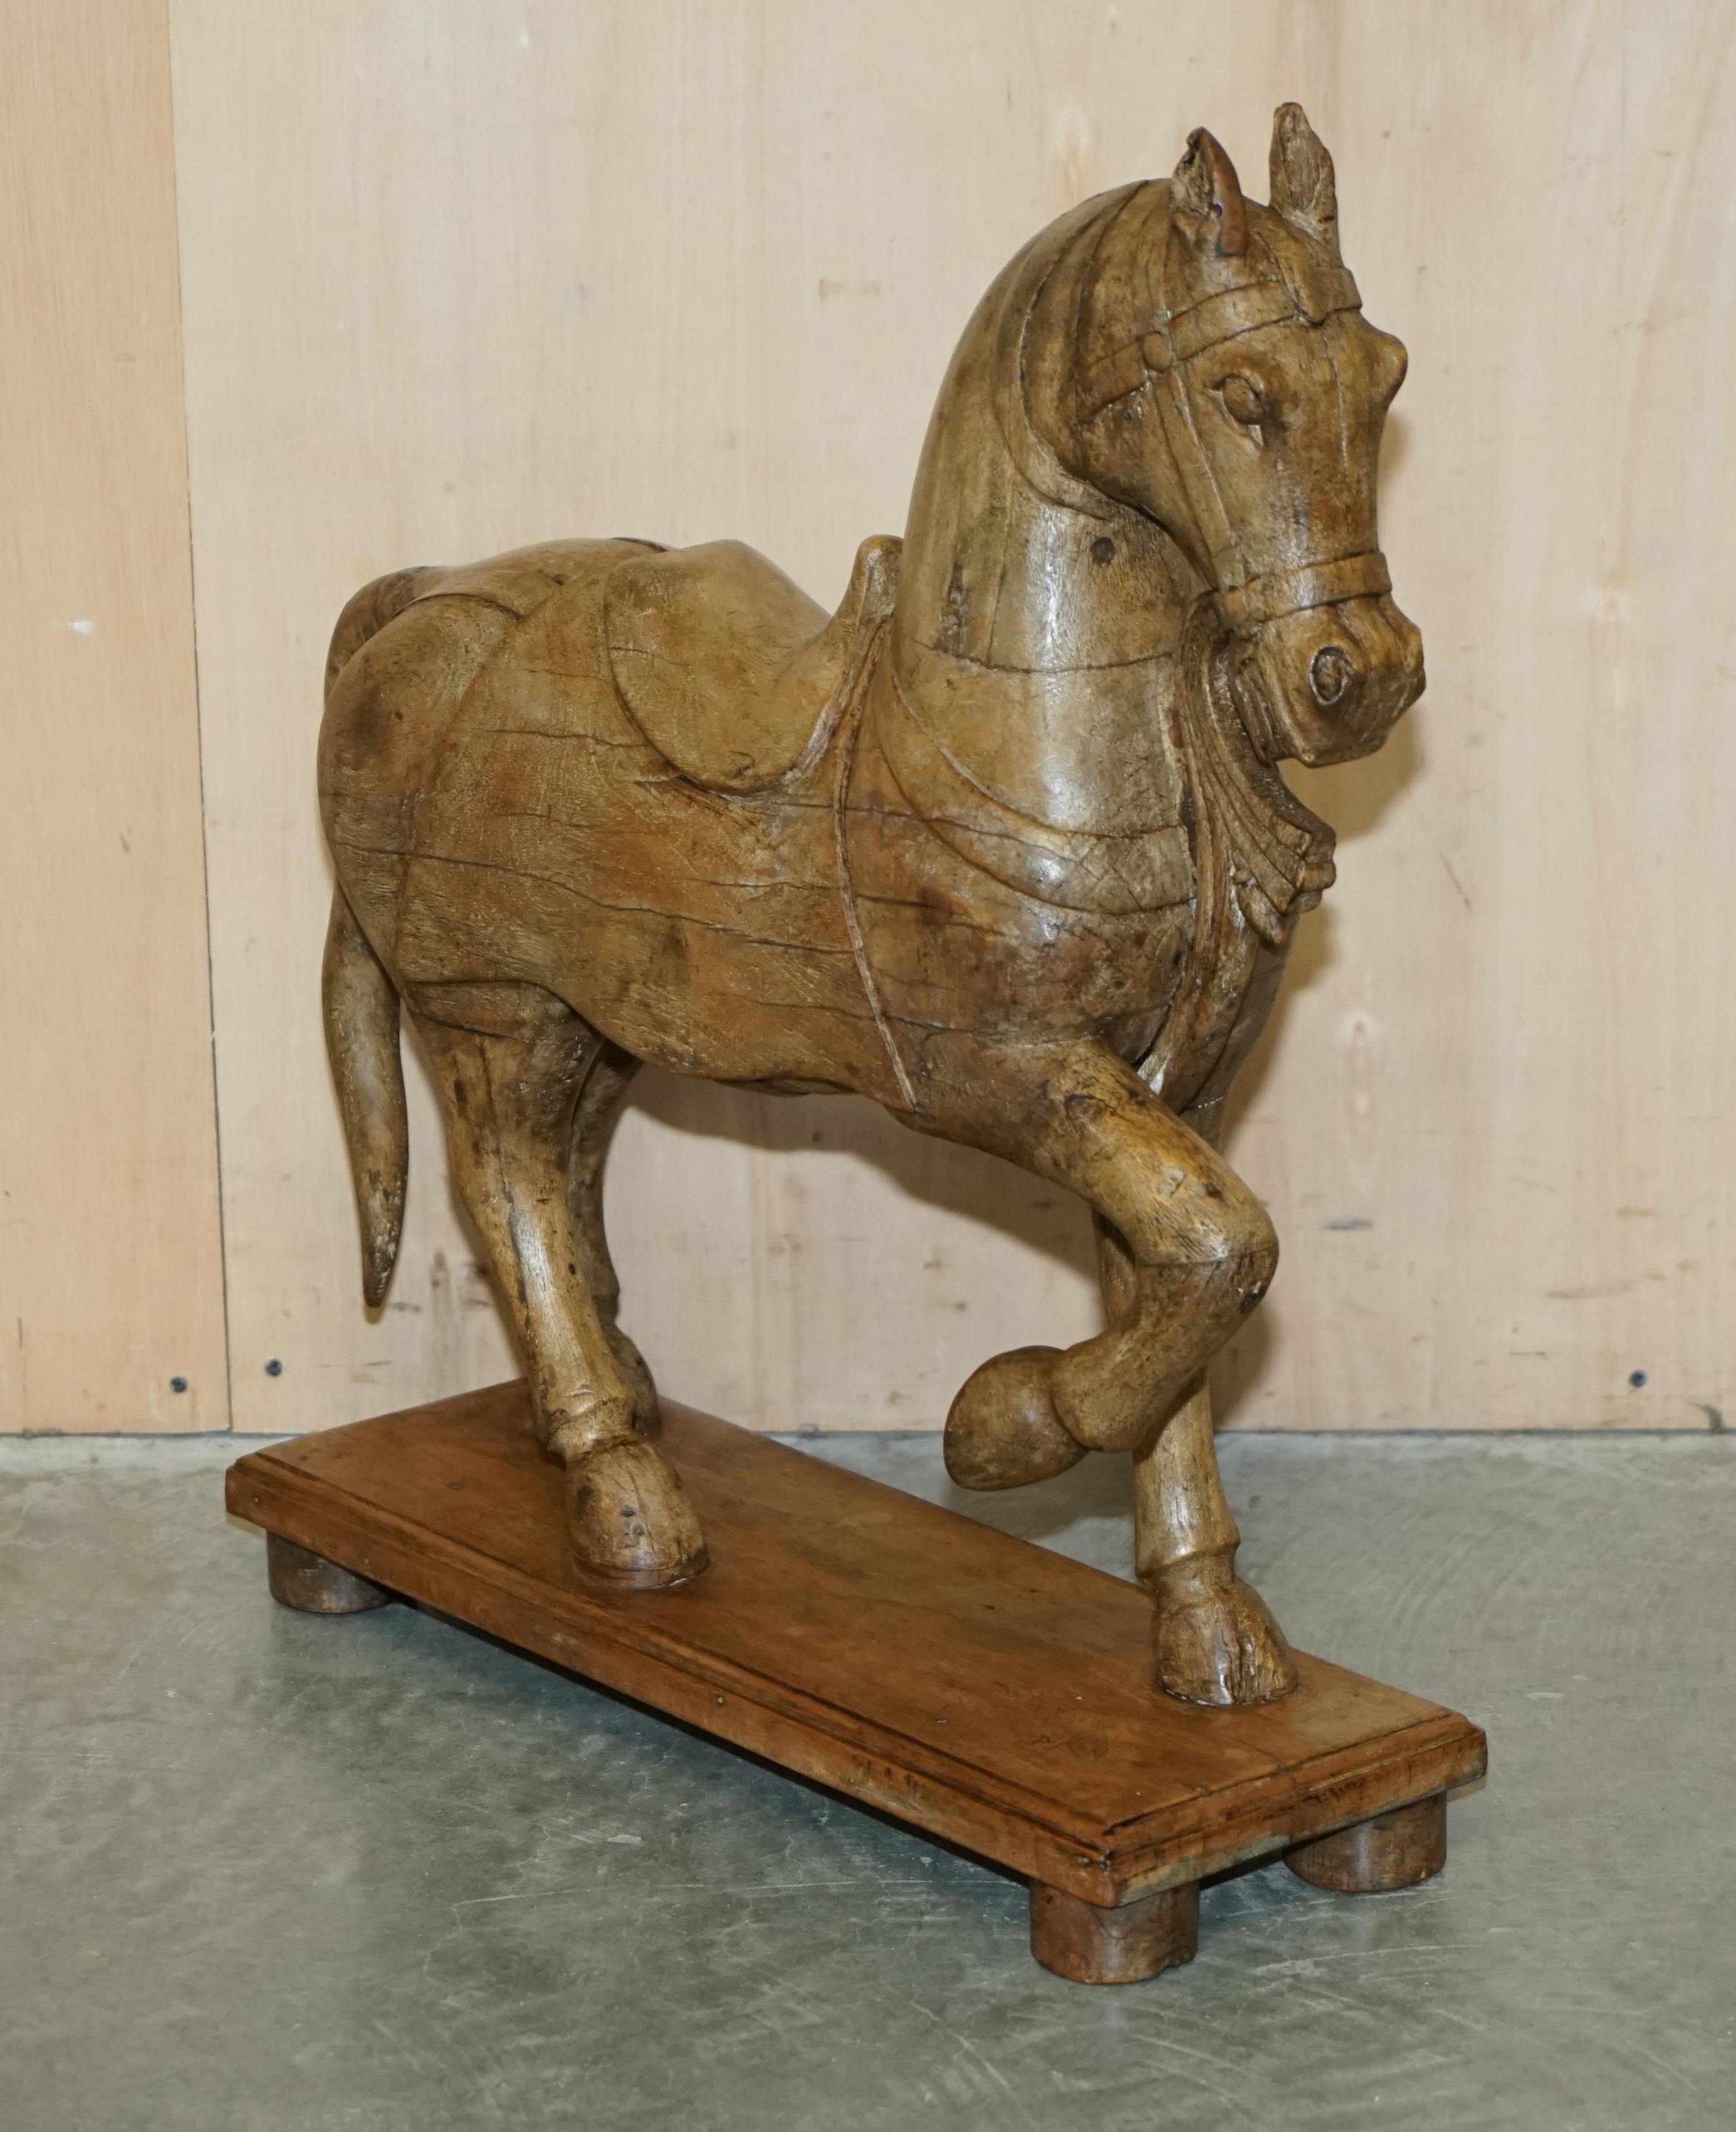 We are delighted to offer for sale this very decorative pair of circa 1880 English hand carved wooden horses.

A good looking well made and decorative pair, they would look amazing in a bay window or on a nice contemporary sideboard so you have a